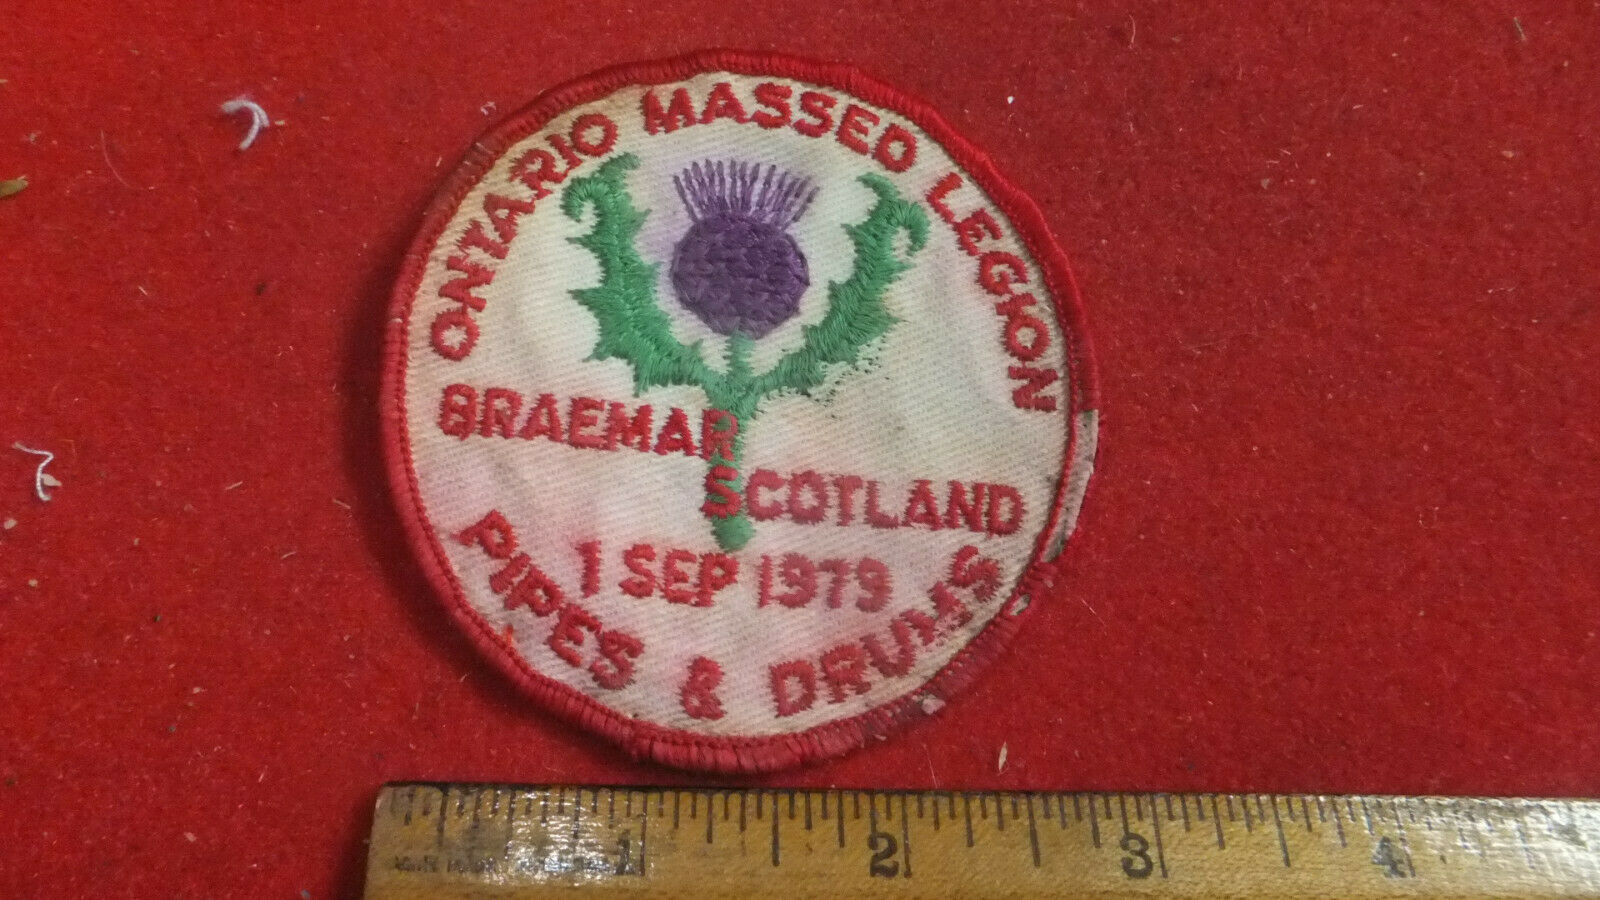 Patch -  Band / Music - Ontario Massed Legion Pipes & Drums - Scotland 1979